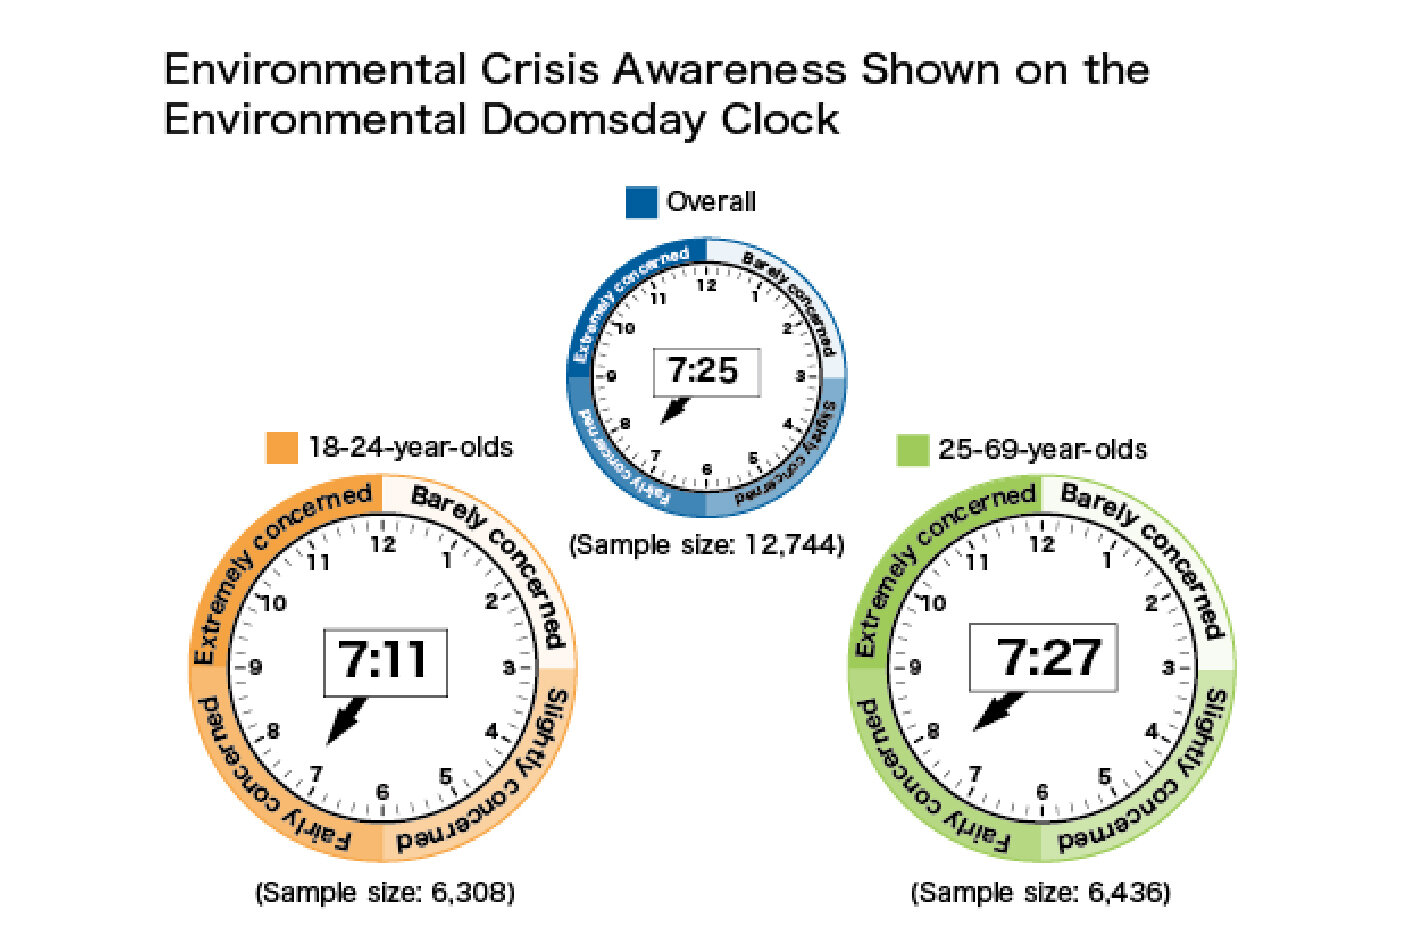 Survey on the Awareness of Environmental Issues Among the General Public 